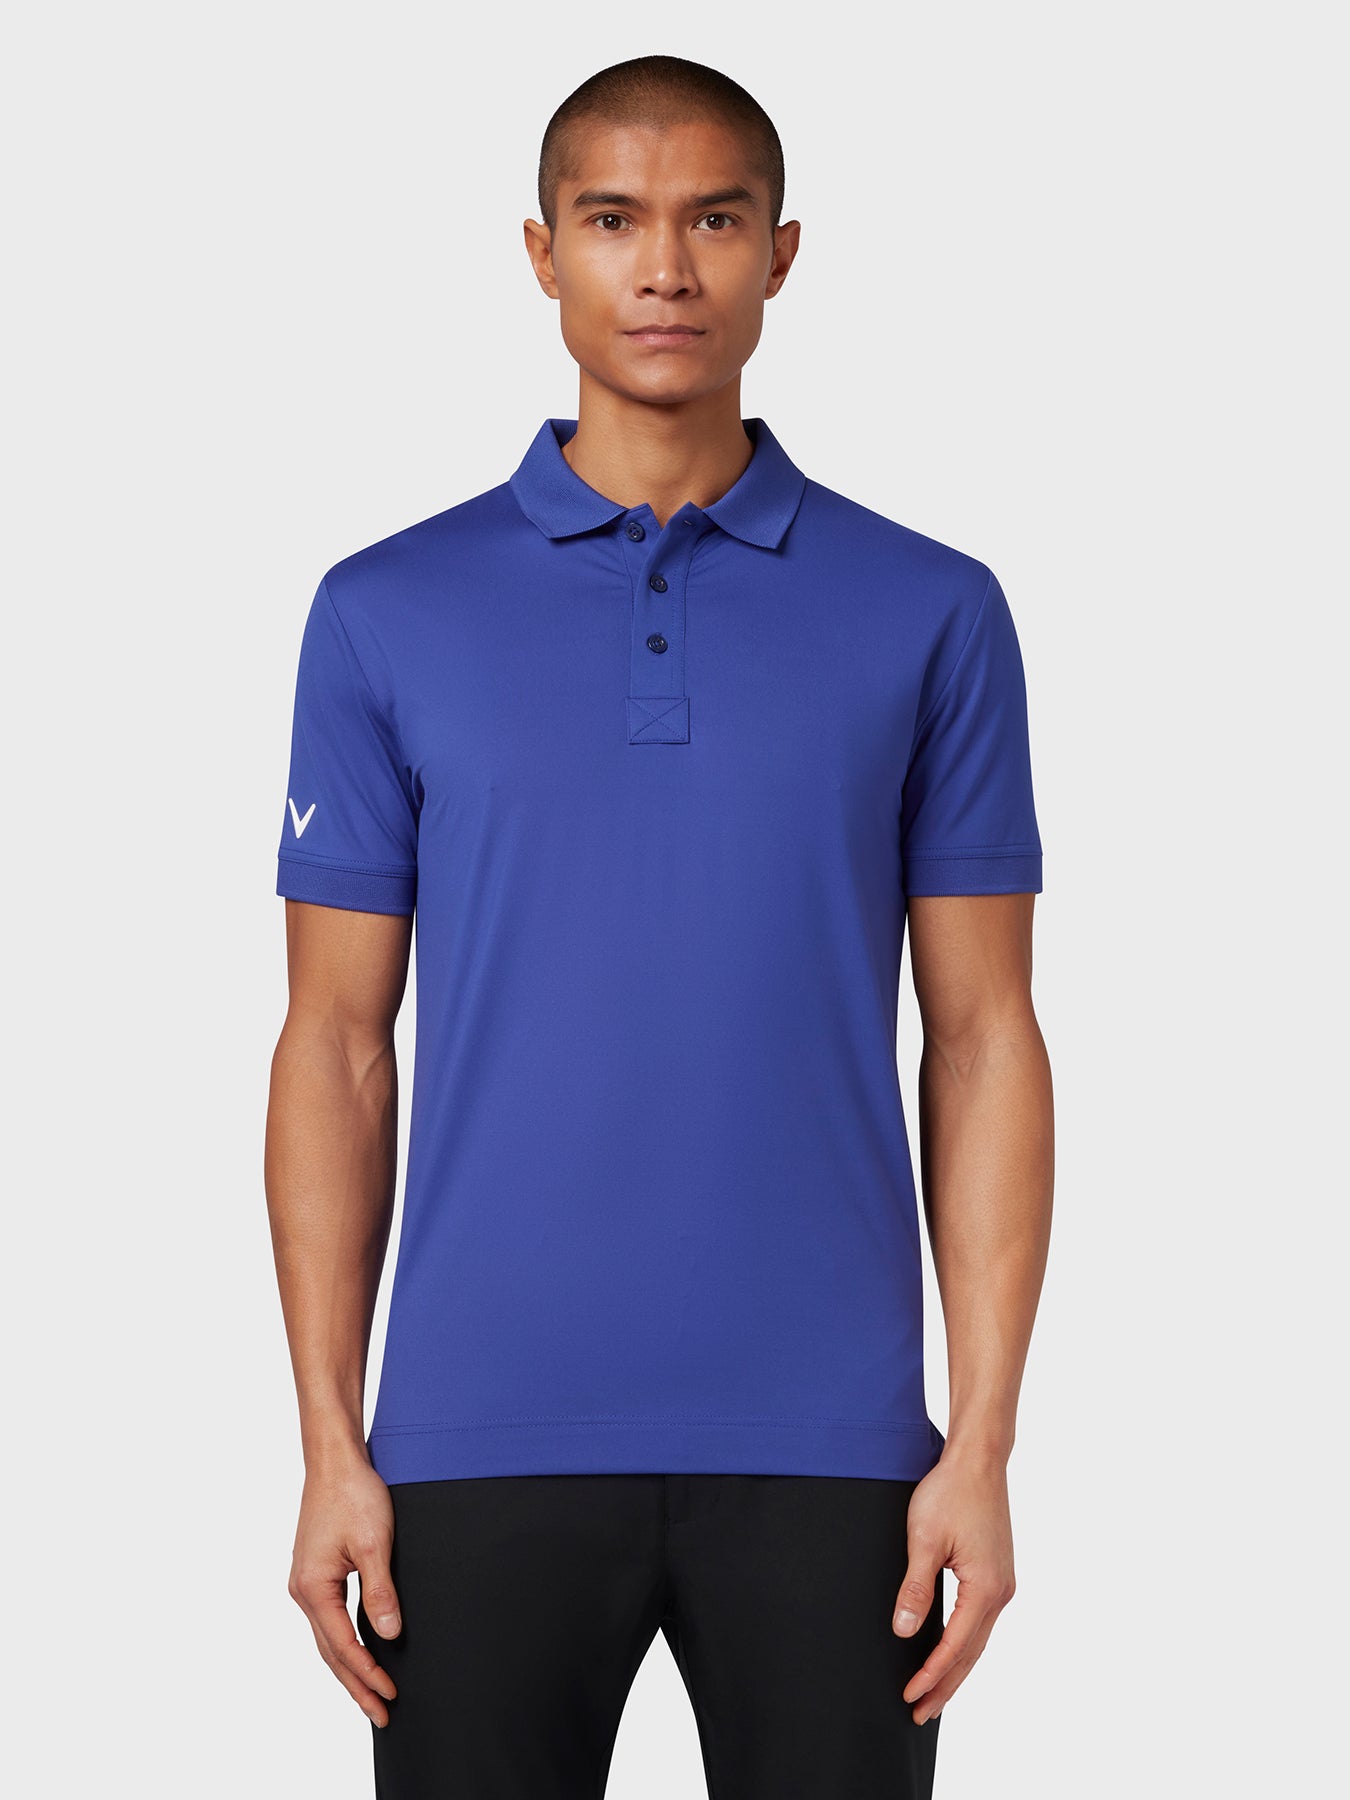 View X Series Solid Ribbed Polo In Clematis Blue Clematis Blue XL information